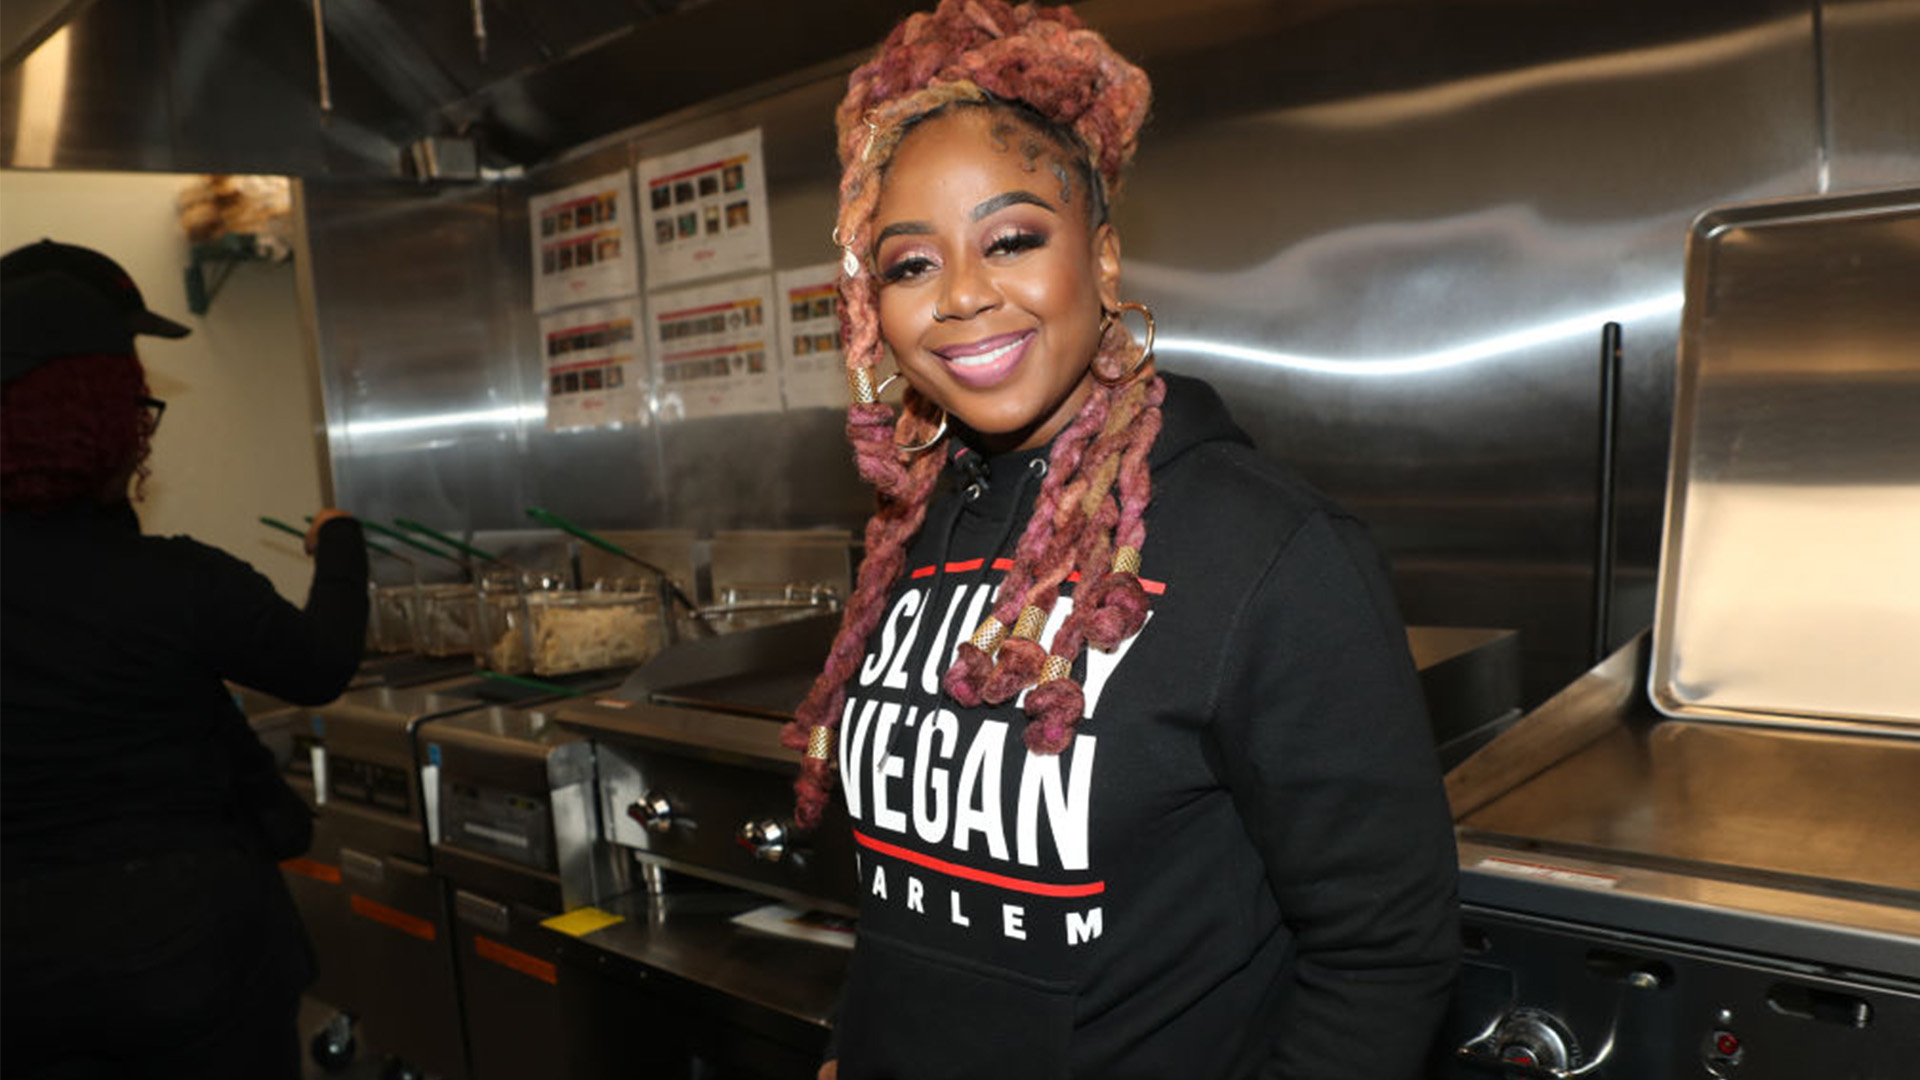 Pinky Cole To Merge Slutty Vegan And Bar Vegan Into 1 Location For The First Time, Starting In Her Hometown Of Baltimore